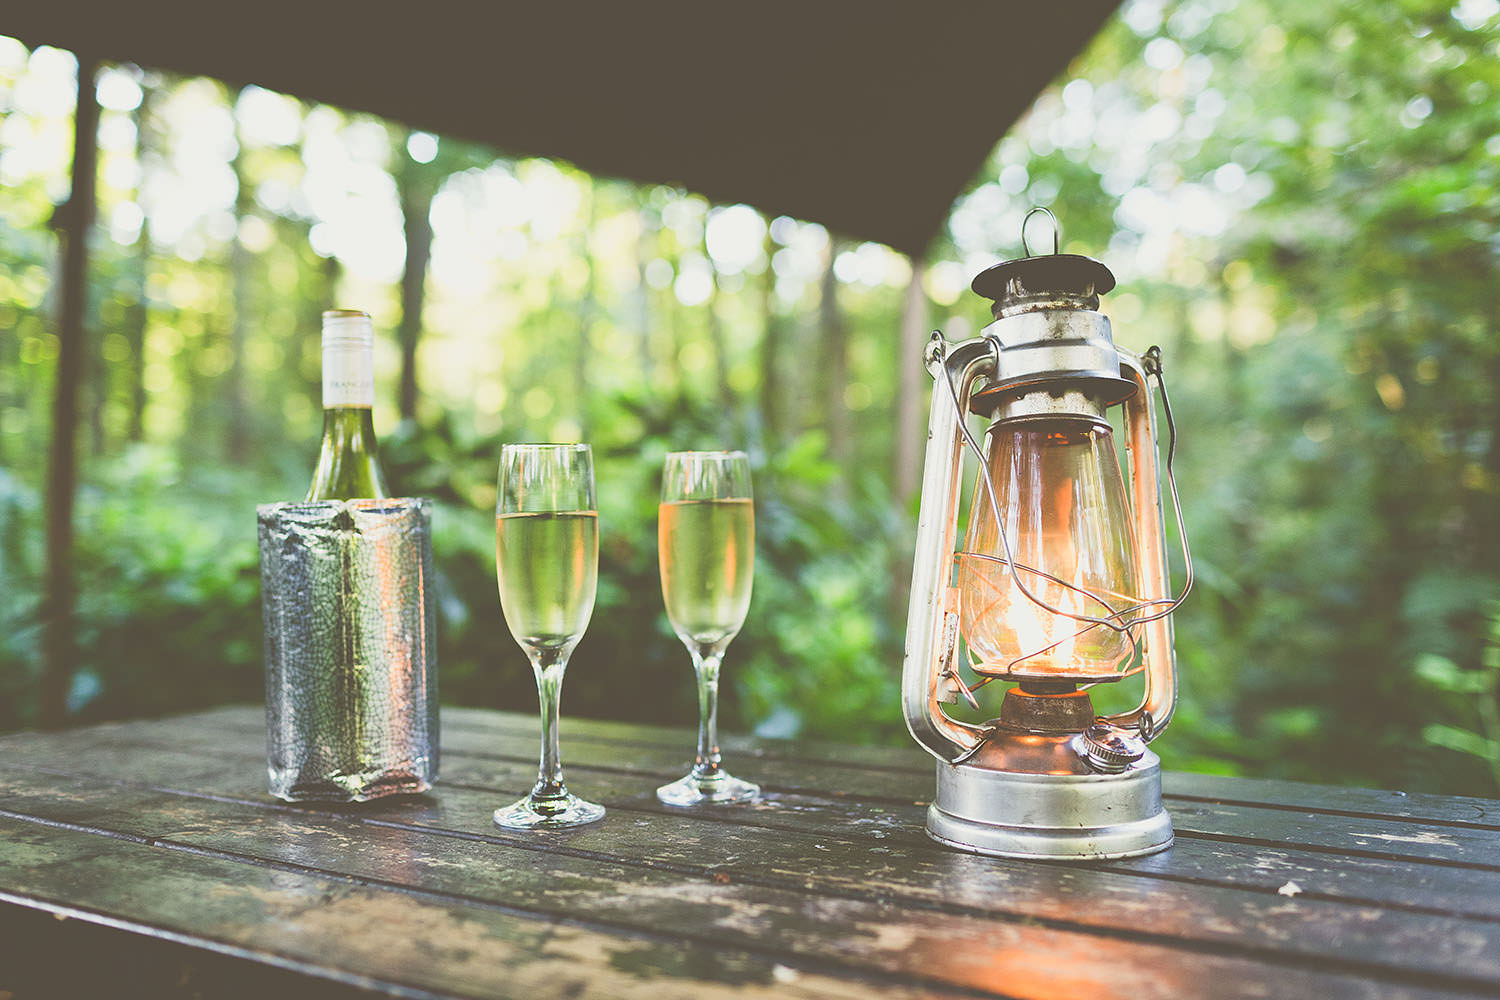 Lantern with two glasses of champagne